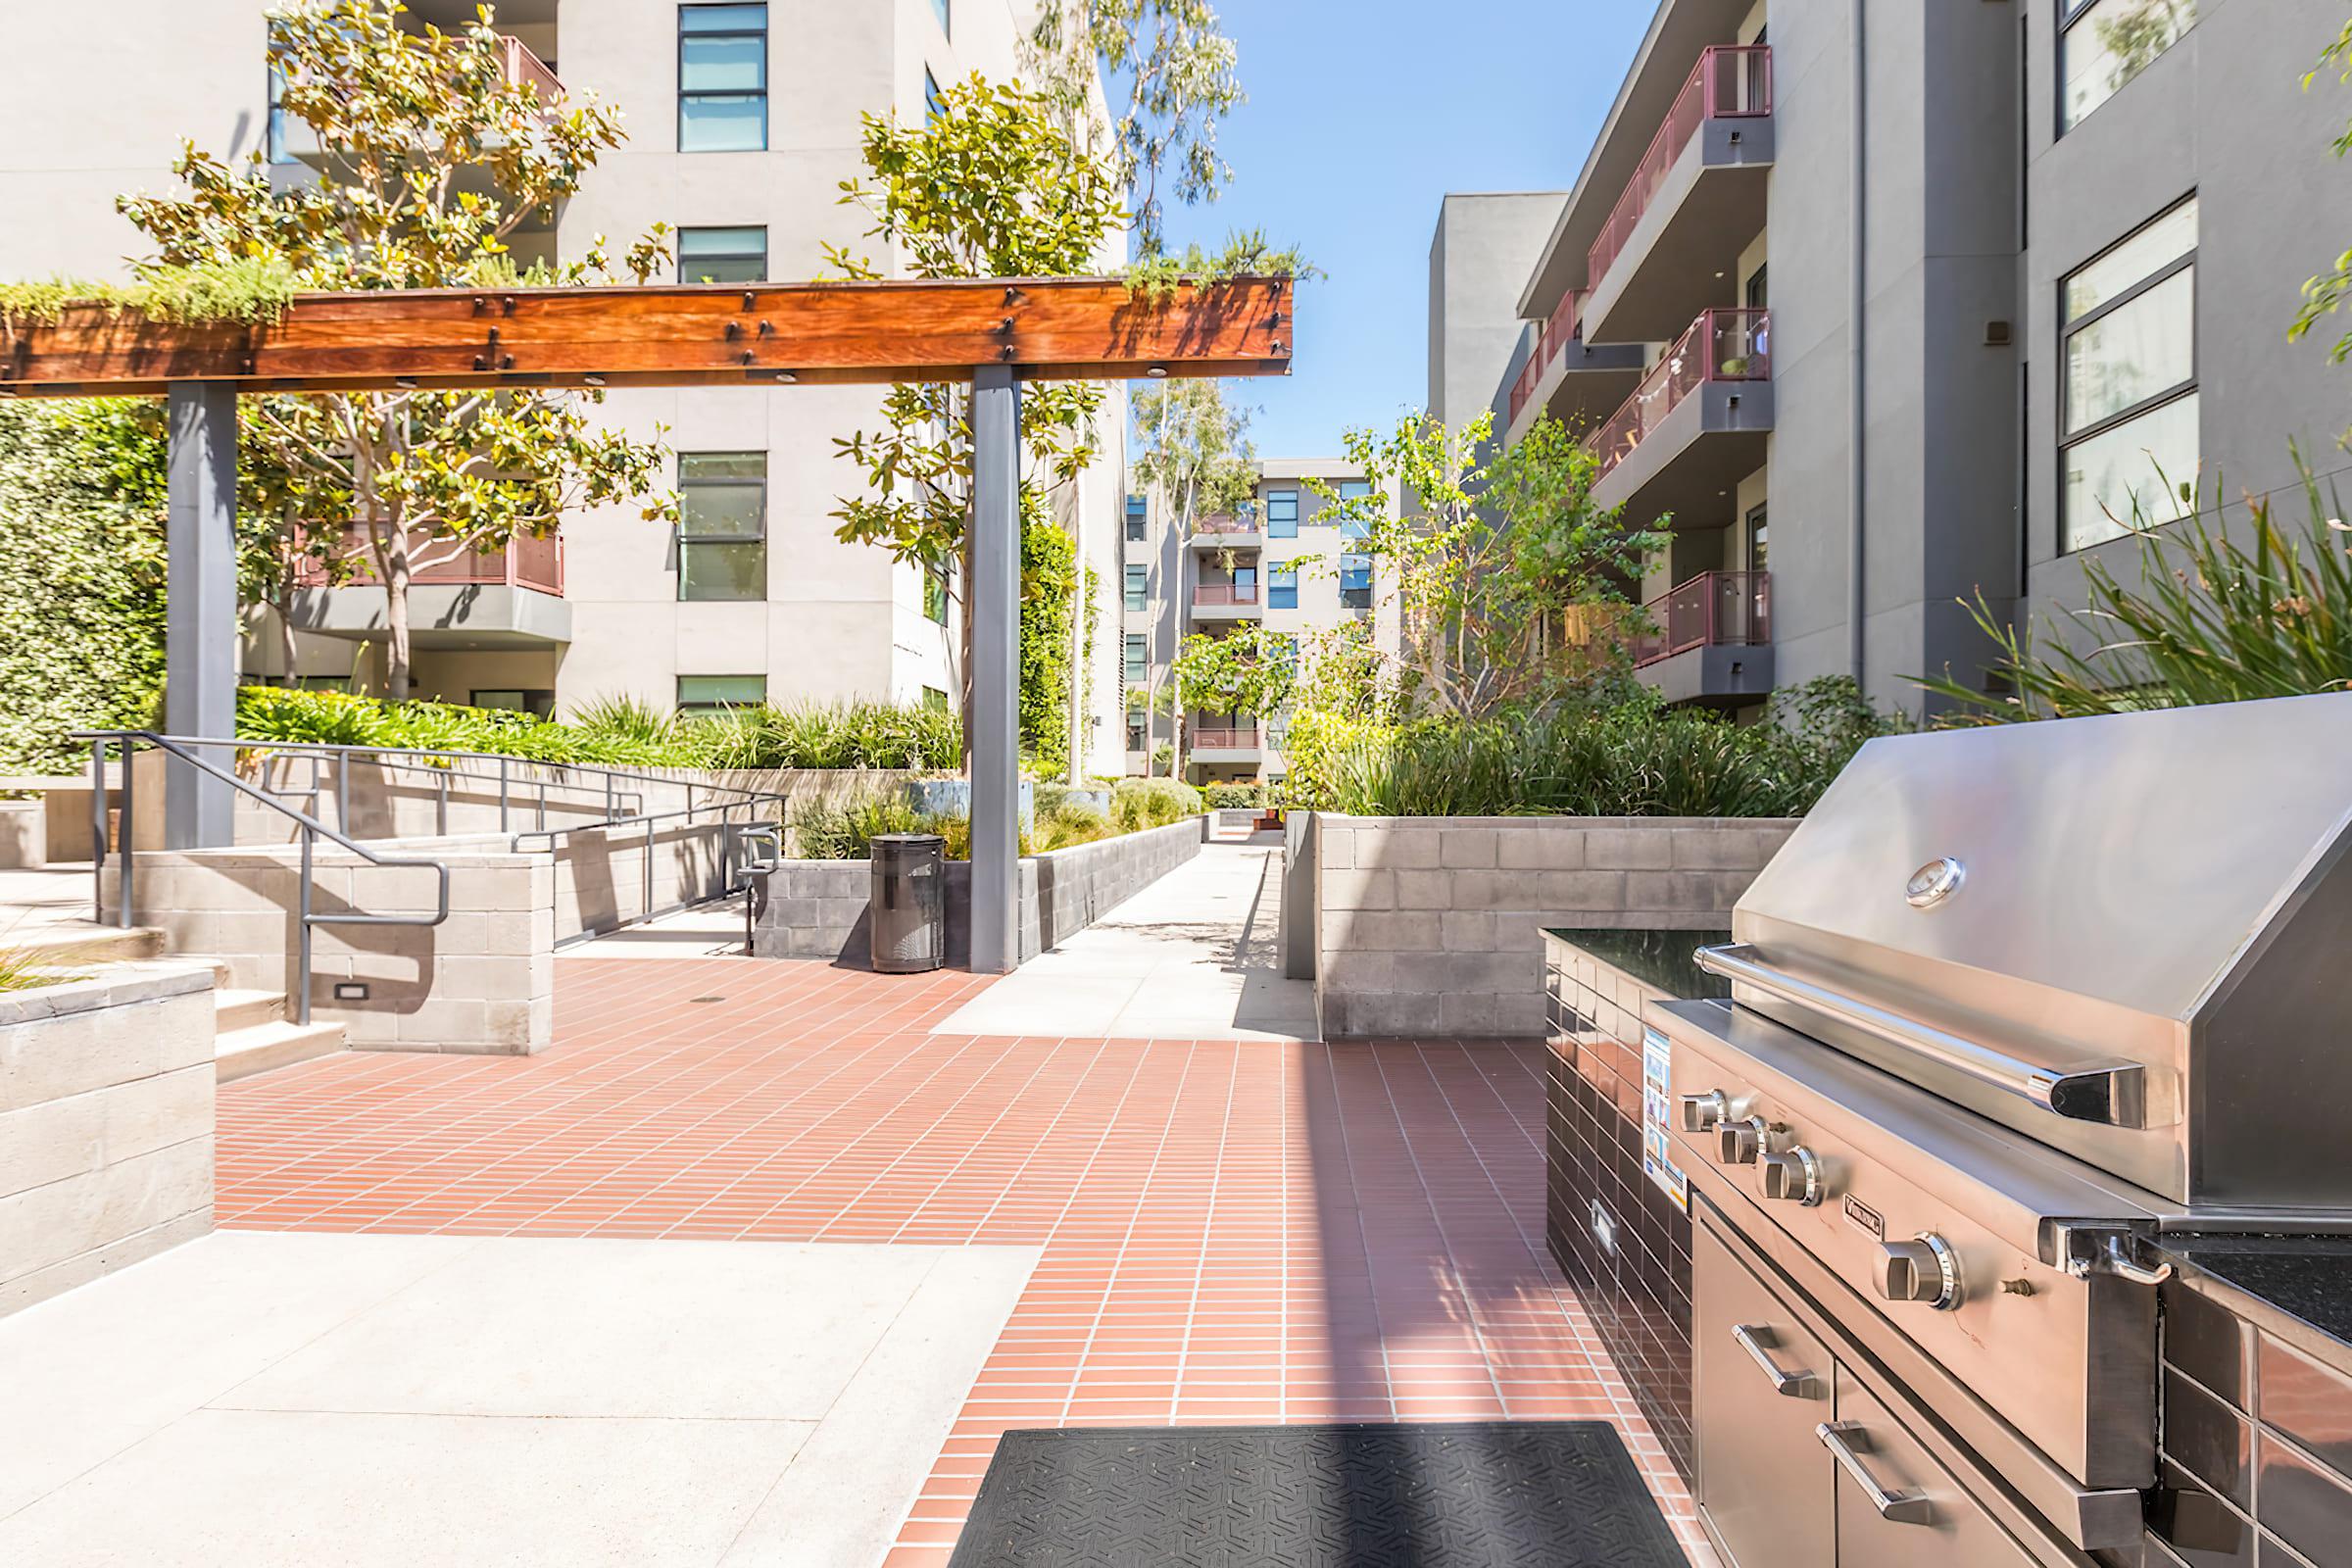 stainless steel barbecues in the community courtyard